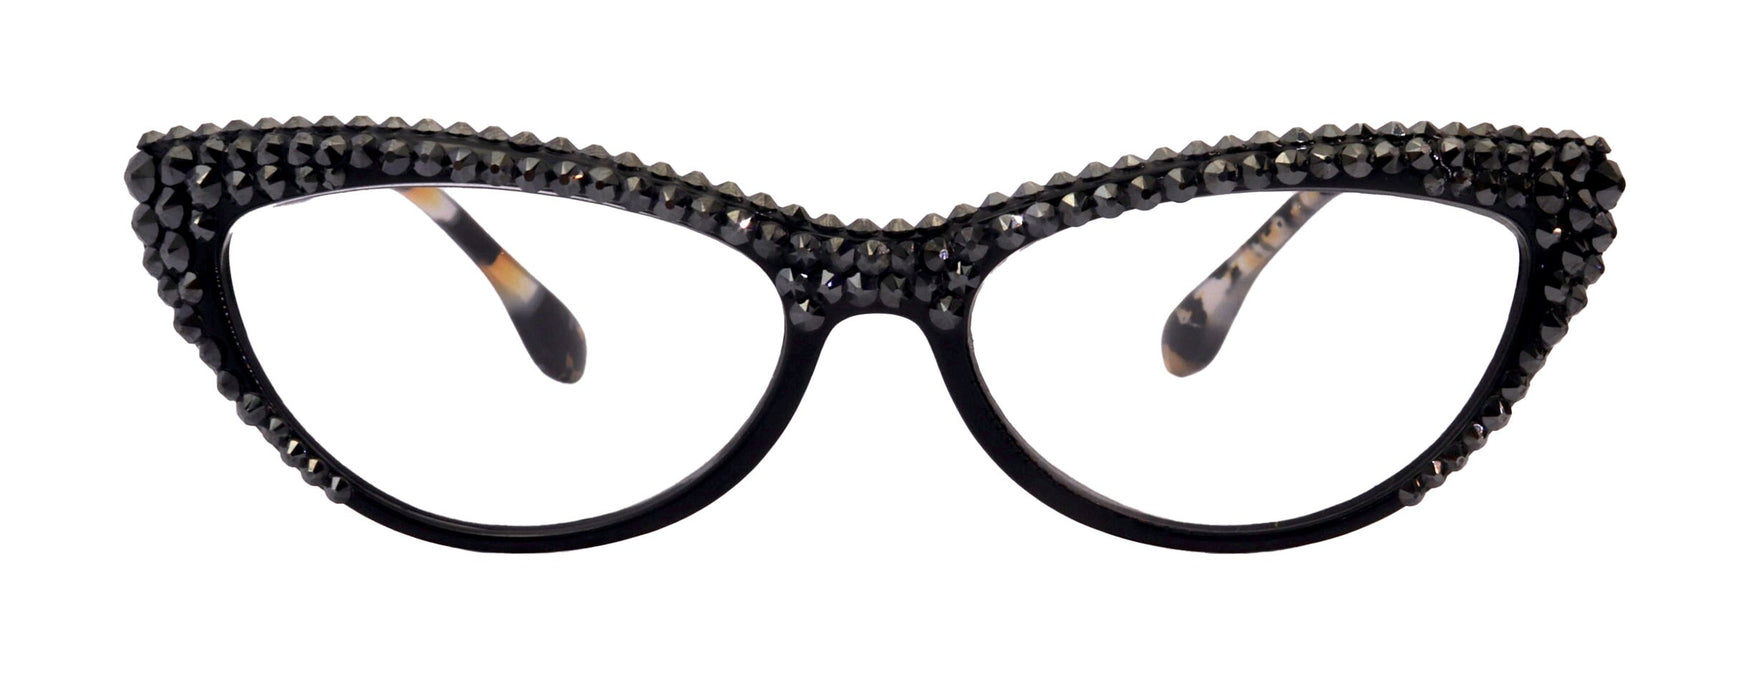 The Lynx, (Bling) Reading Glasses 4 Women W 2x (Full Top) (Hematite) Genuine European Crystals, Magnifying Cat Eye NY Fifth Avenue